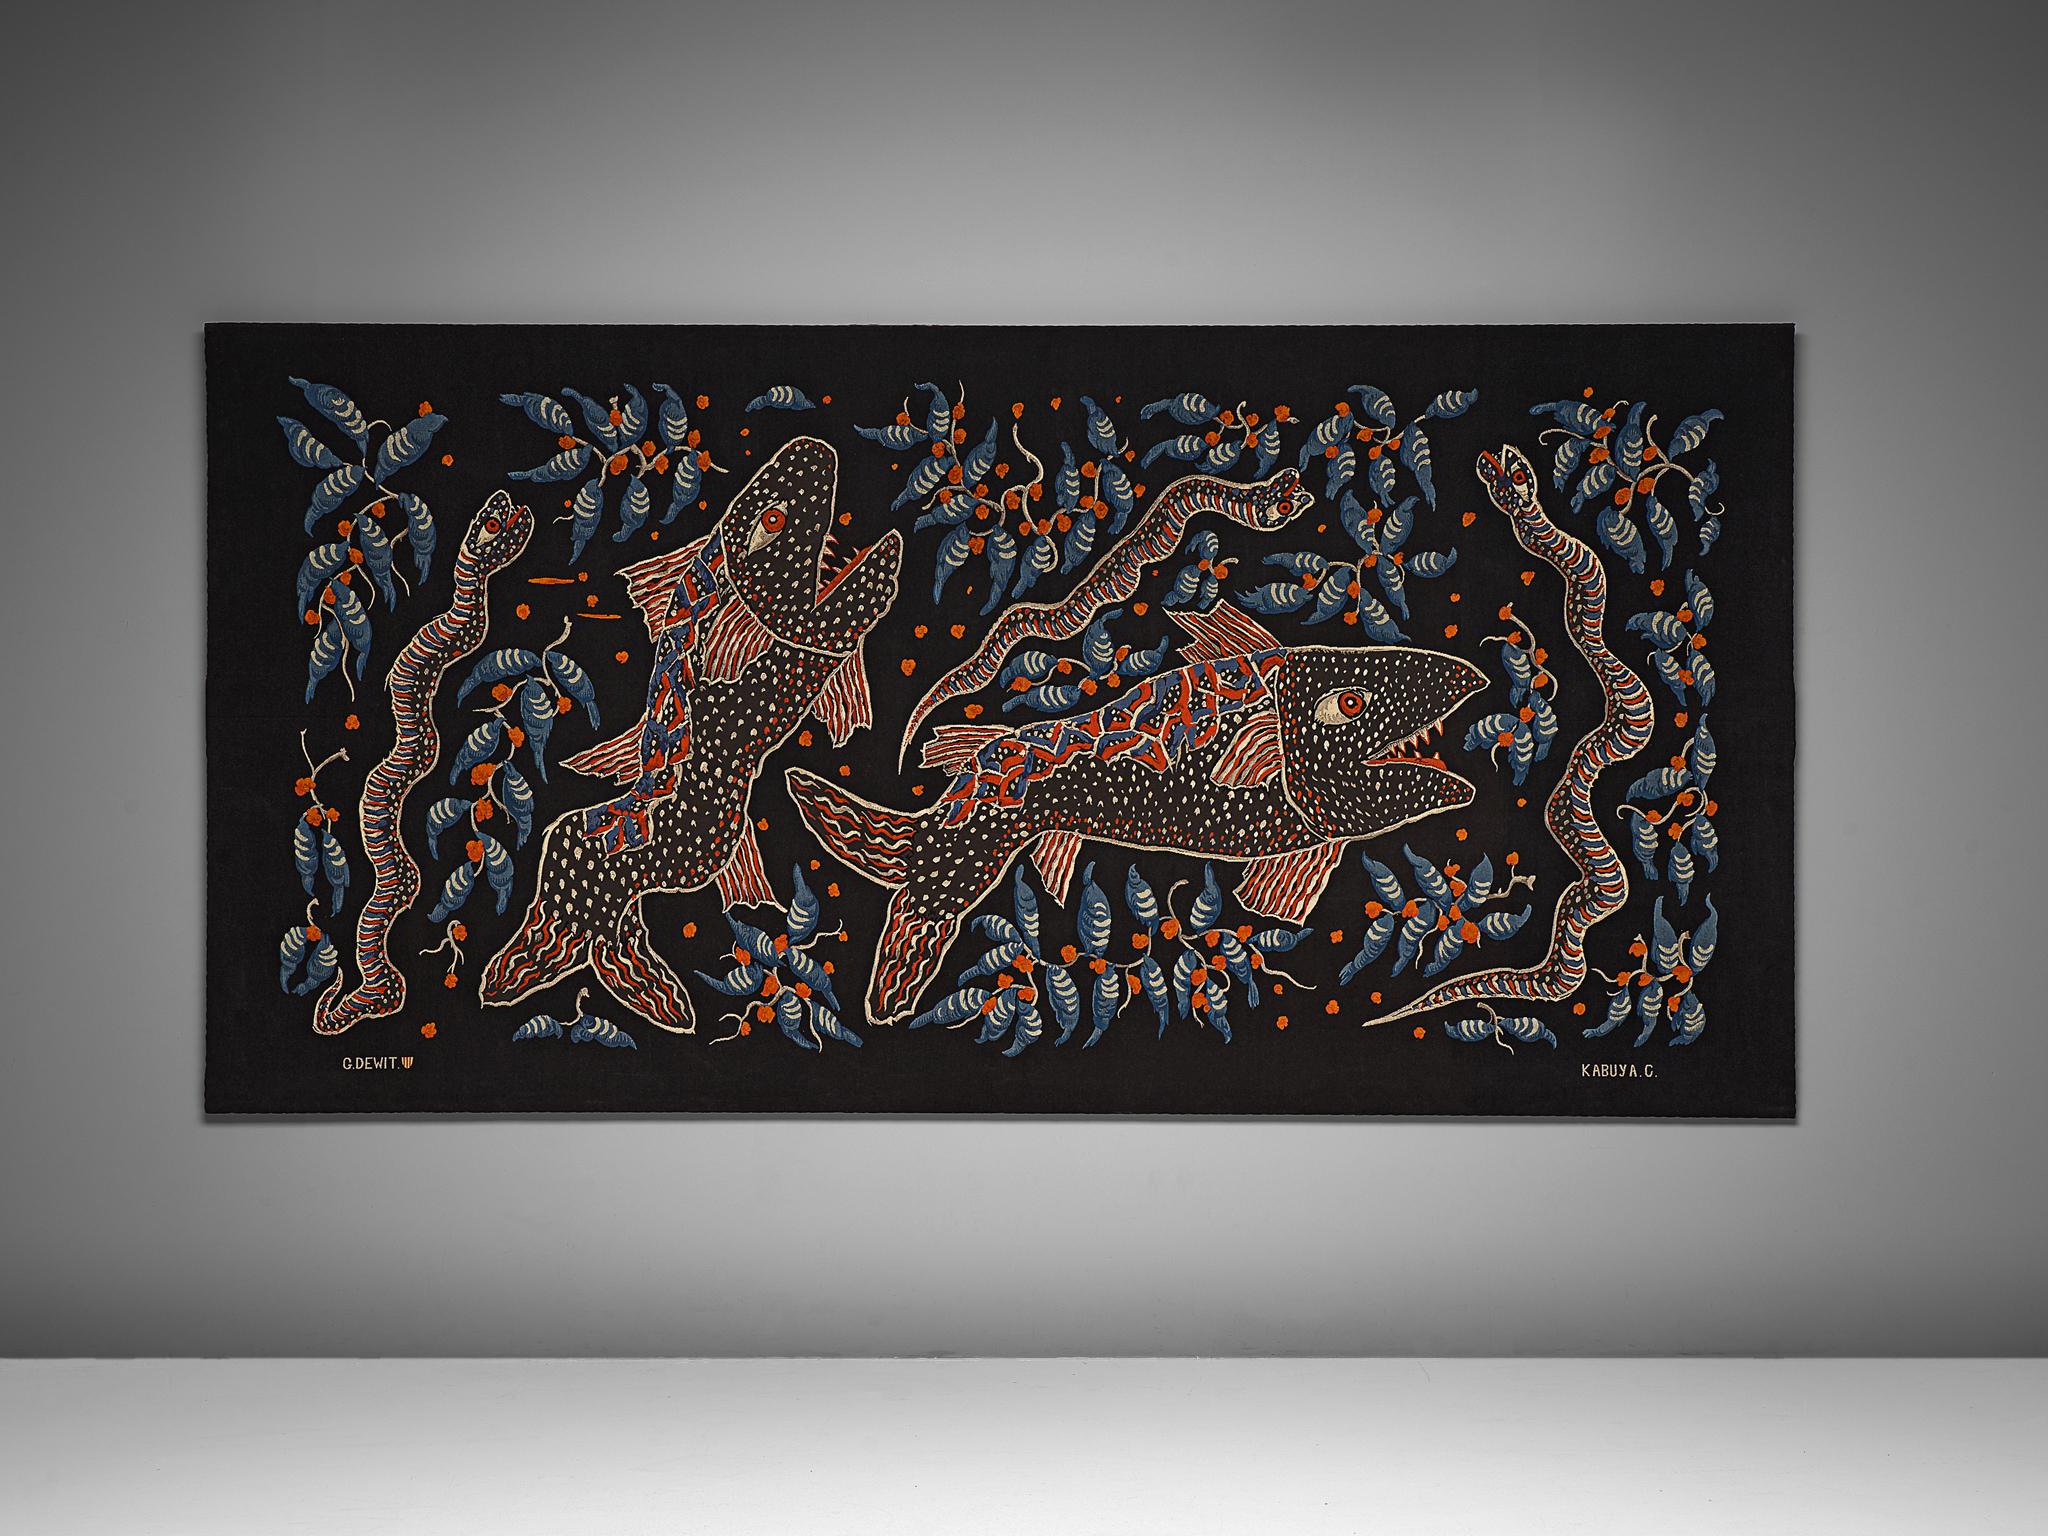 Celestin Kabuya manufactured by Gaspard de Wit, wall tapestry, fabric, Belgium, 1960s.

Grand wall tapestry designed by Celestin Kabuya and manufactured by Gaspard de Wit for the Foncolin building in Brussels. The Foncolin building, a modernist